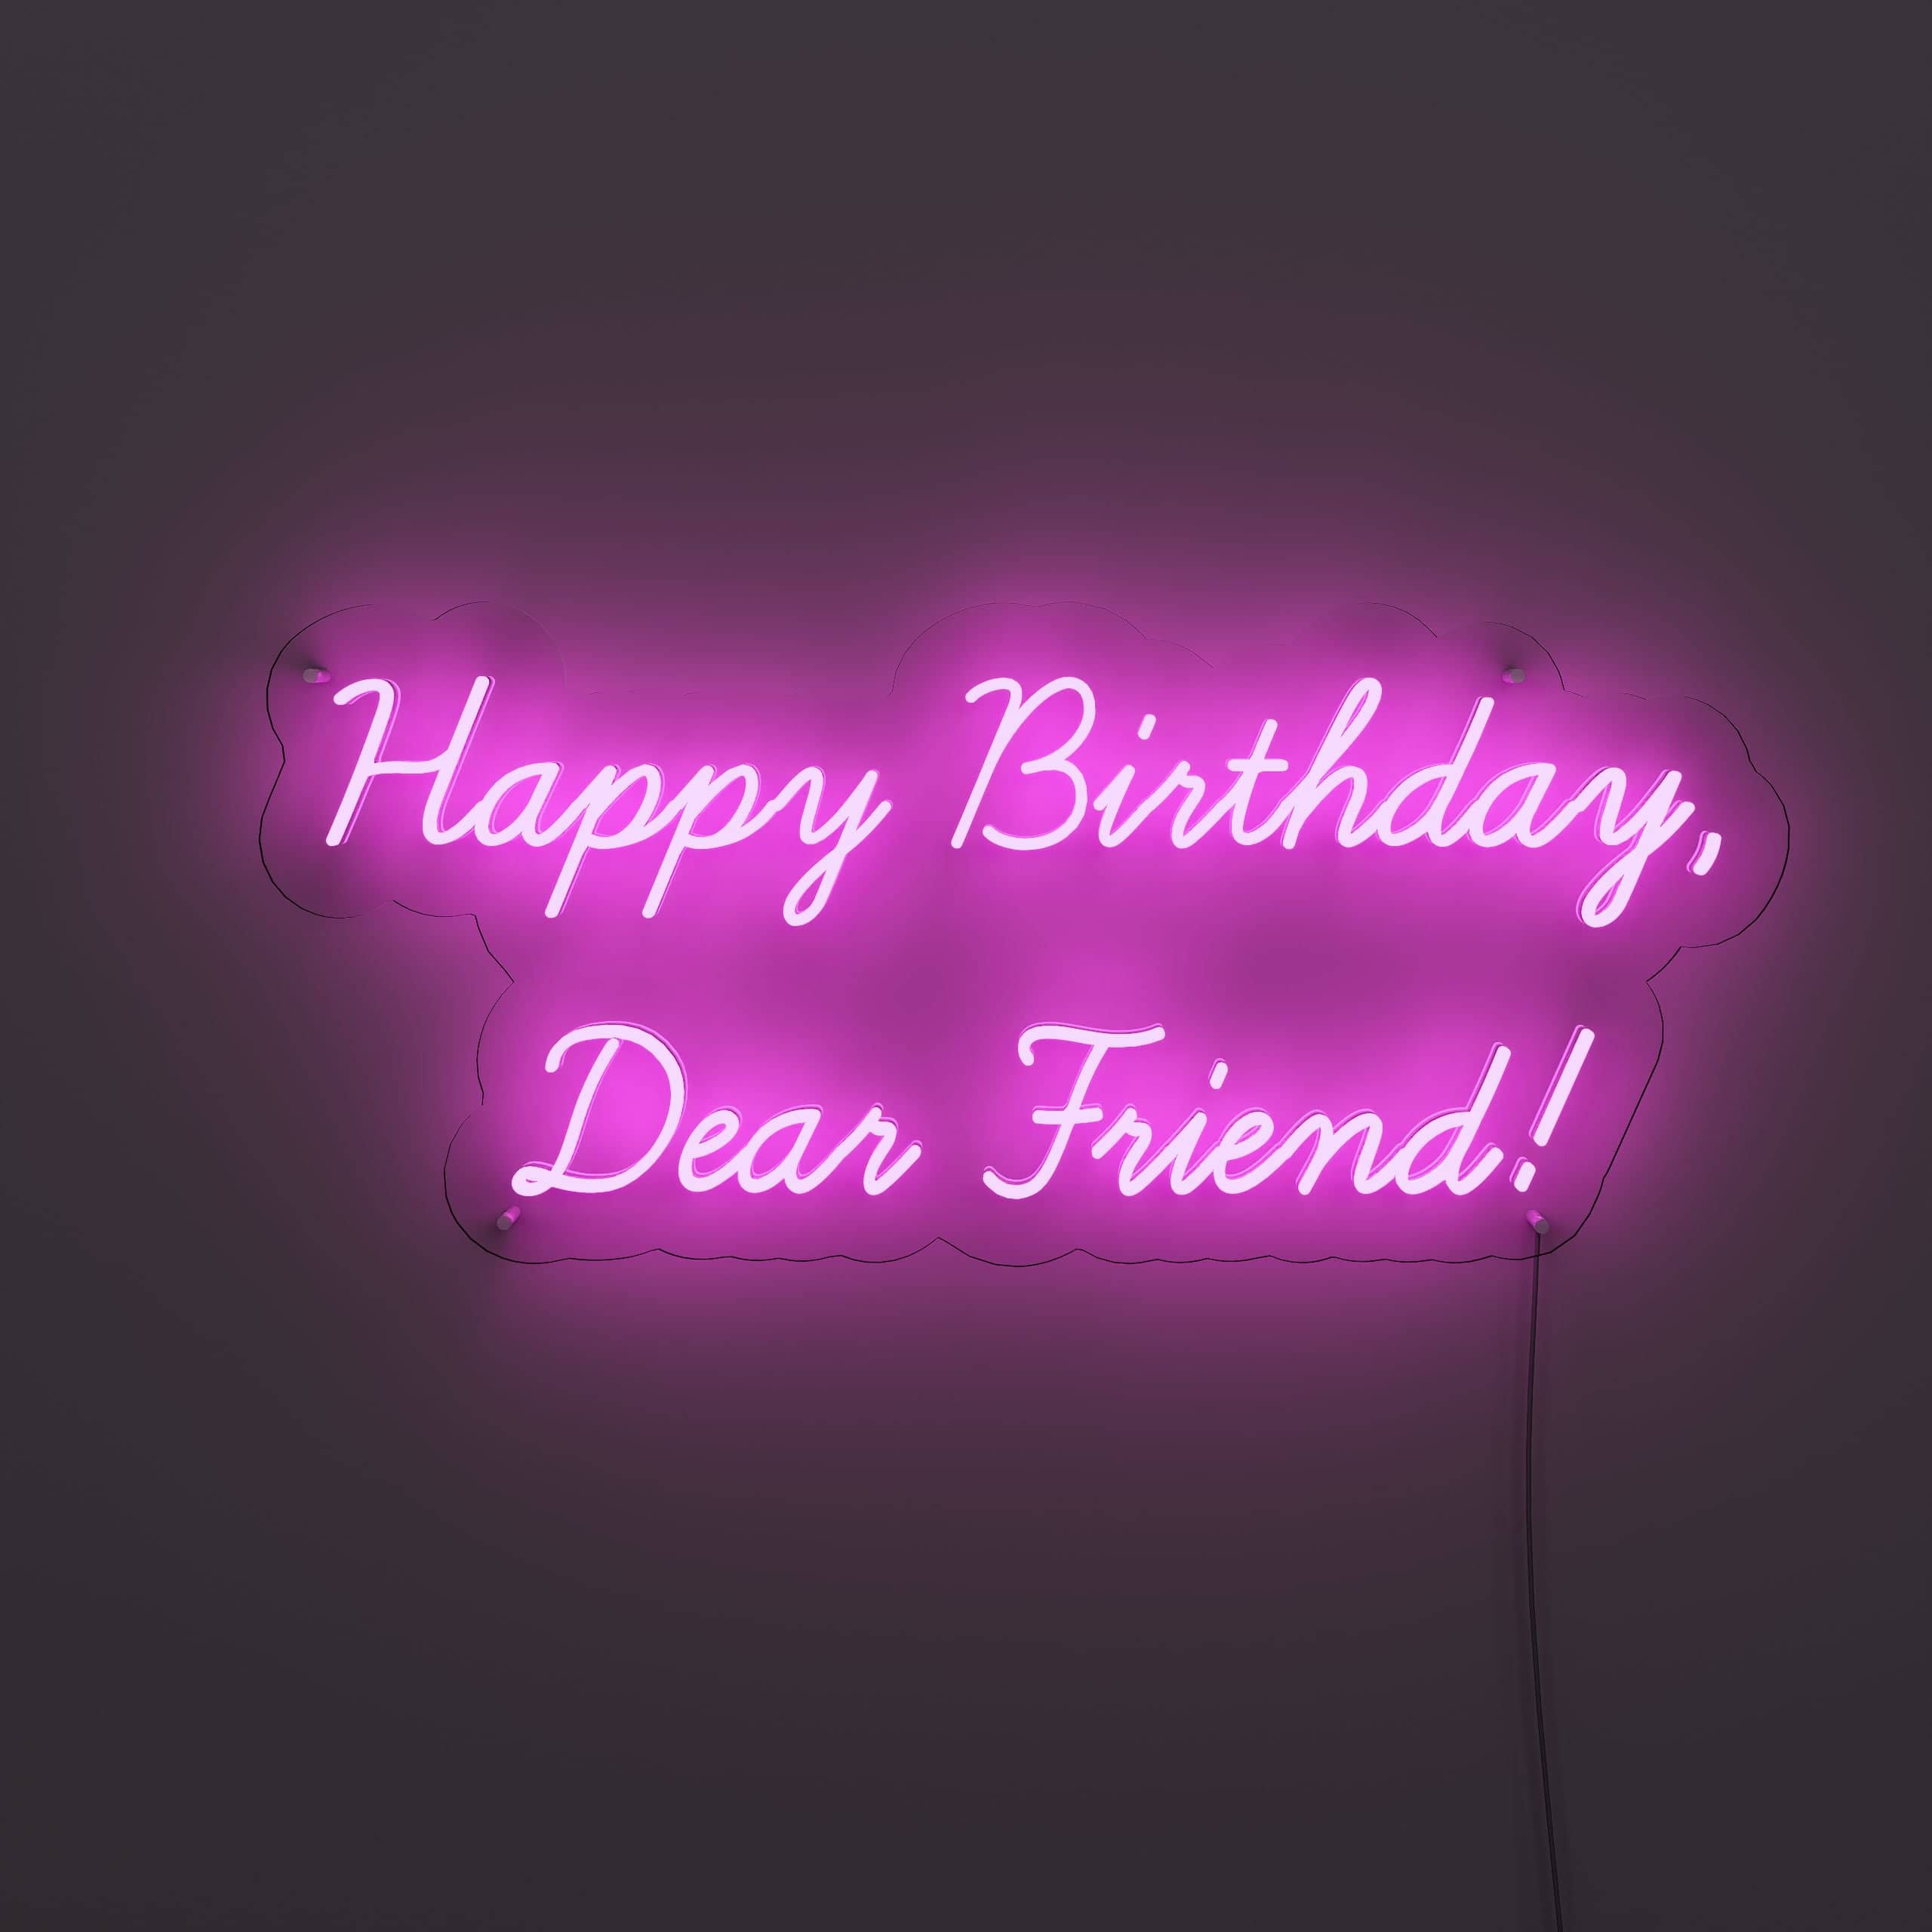 celebrating-the-incredible-person-you-are-on-your-birthday!-neon-sign-lite